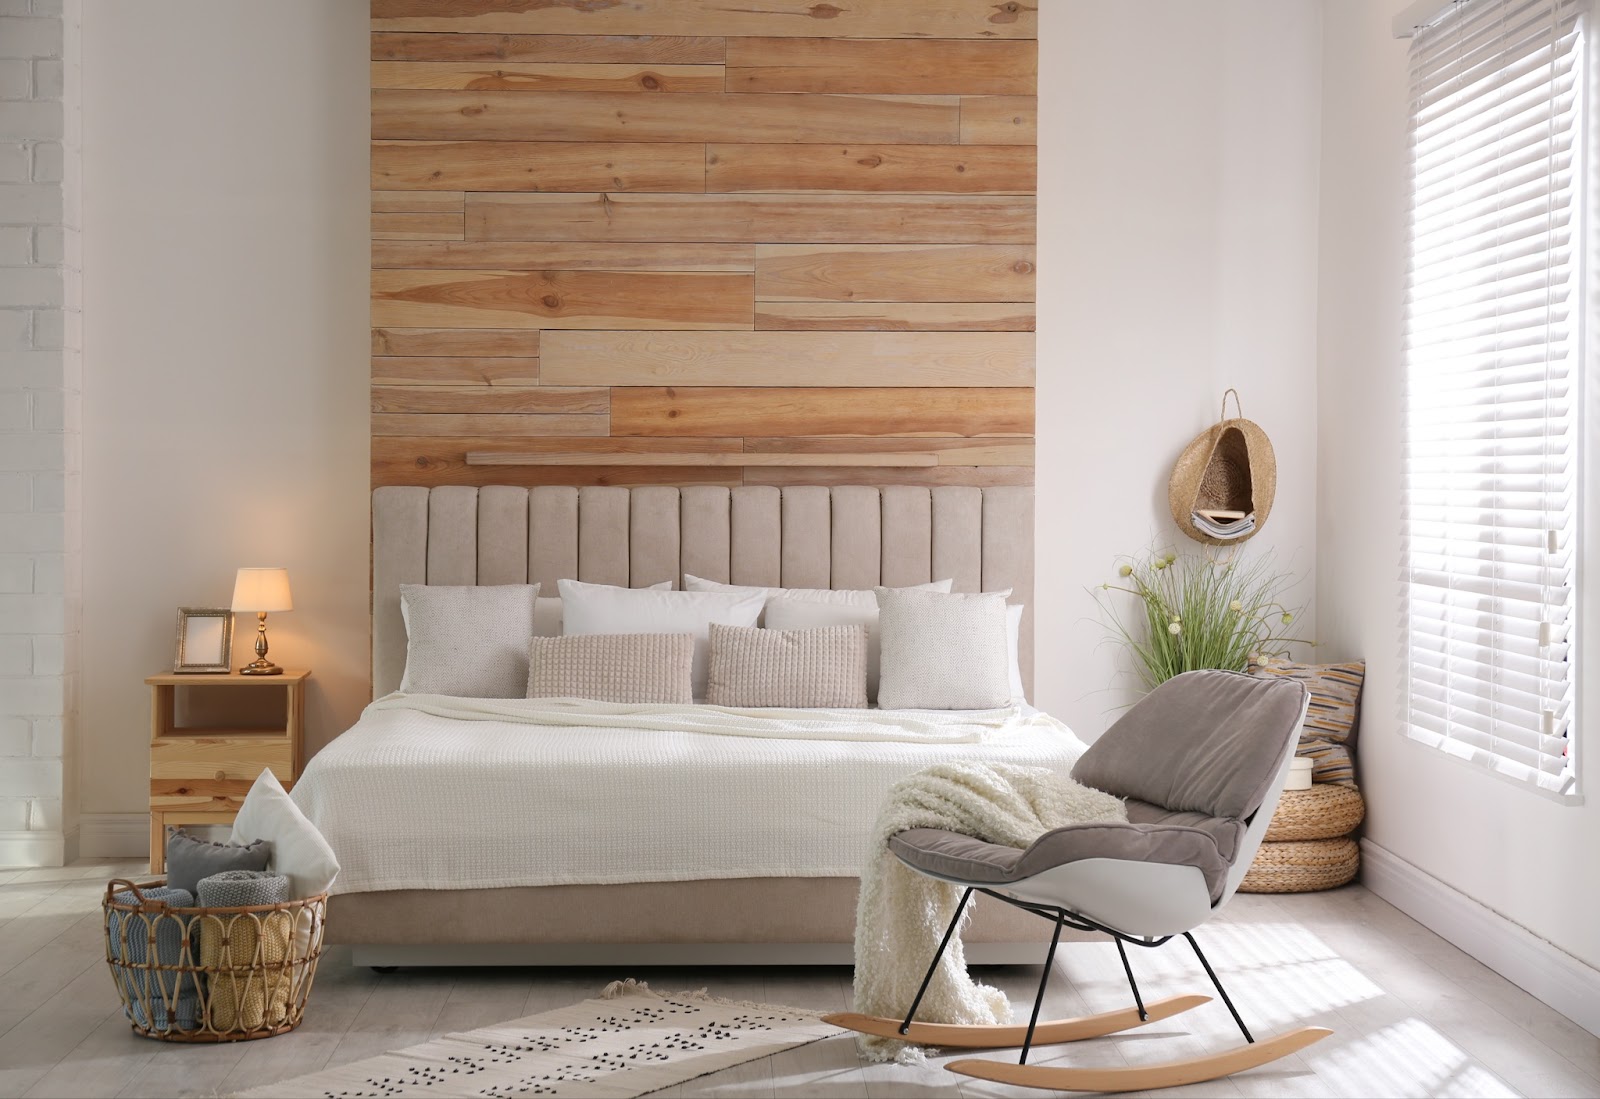 Scandinavian design master bedroom with neutral palette, a floor to ceiling wood panel centers the headboard on the wall and a modern rocker.  Multi-layered textures achieved through wicker, rattan, wood and textiles and plant life completes the modern design.